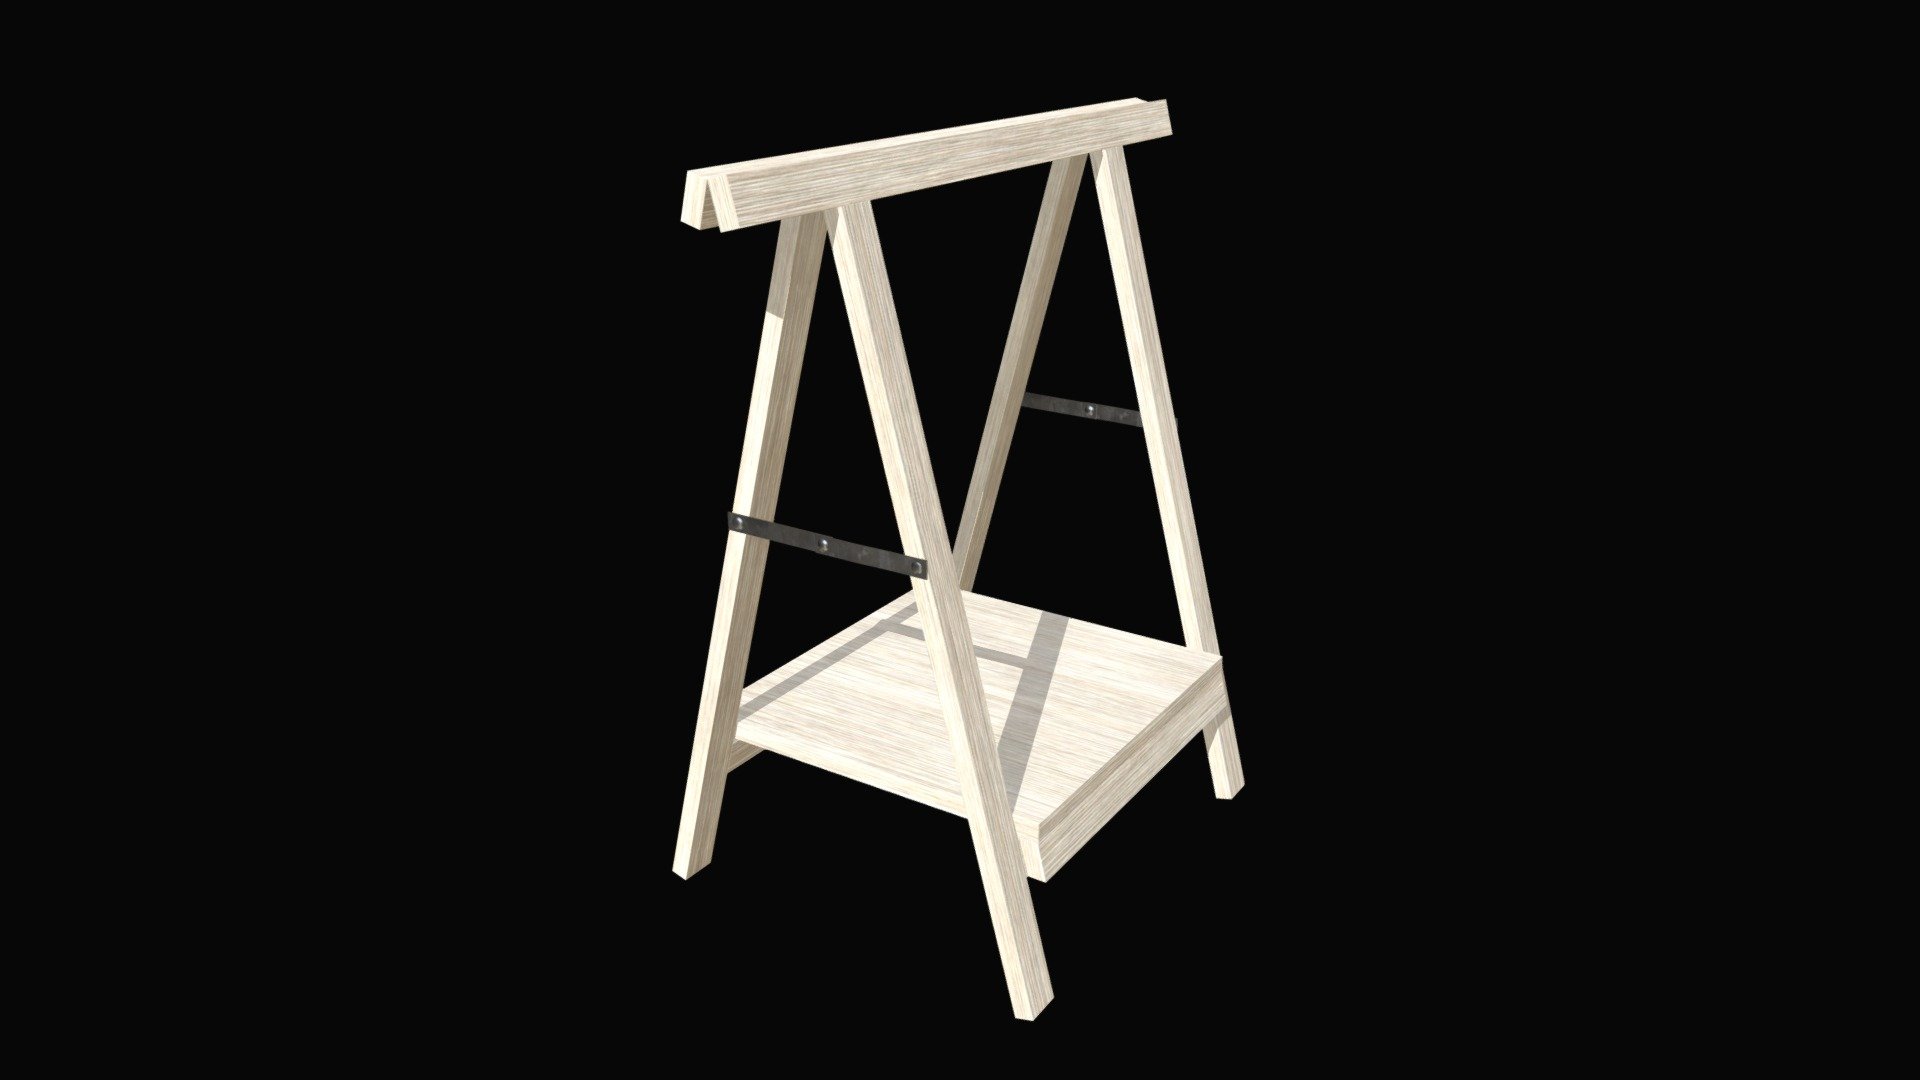 === The following description refers to the additional ZIP package provided with this model ===

Trestle support 3D Model, nr. 2 in my collection. This one can be open/closed (like the first one); plus, it has a (removable) bottom shelf. 5 individual objects sharing the same non overlapping UV Layout map, Material and PBR Textures set. Production-ready 3D Model, with PBR materials, textures, non overlapping UV Layout map provided in the package.

Quads only geometries (no tris/ngons).

Formats included: FBX, OBJ; scenes: BLEND (with Cycles / Eevee PBR Materials and Textures); other: 16-bit PNGs with Alpha.

5 Objects (meshes), 1 PBR Material, UV unwrapped (non overlapping UV Layout map provided in the package); UV-mapped Textures.

UV Layout maps and Image Textures resolutions: 2048x2048; PBR Textures made with Substance Painter.

Polygonal, QUADS ONLY (no tris/ngons); 3270 vertices, 3228 quad faces (6456 tris).

Real world dimensions; scene scale units: cm in Blender 3.3 (that is: Metric with 0.01 scale) 3d model